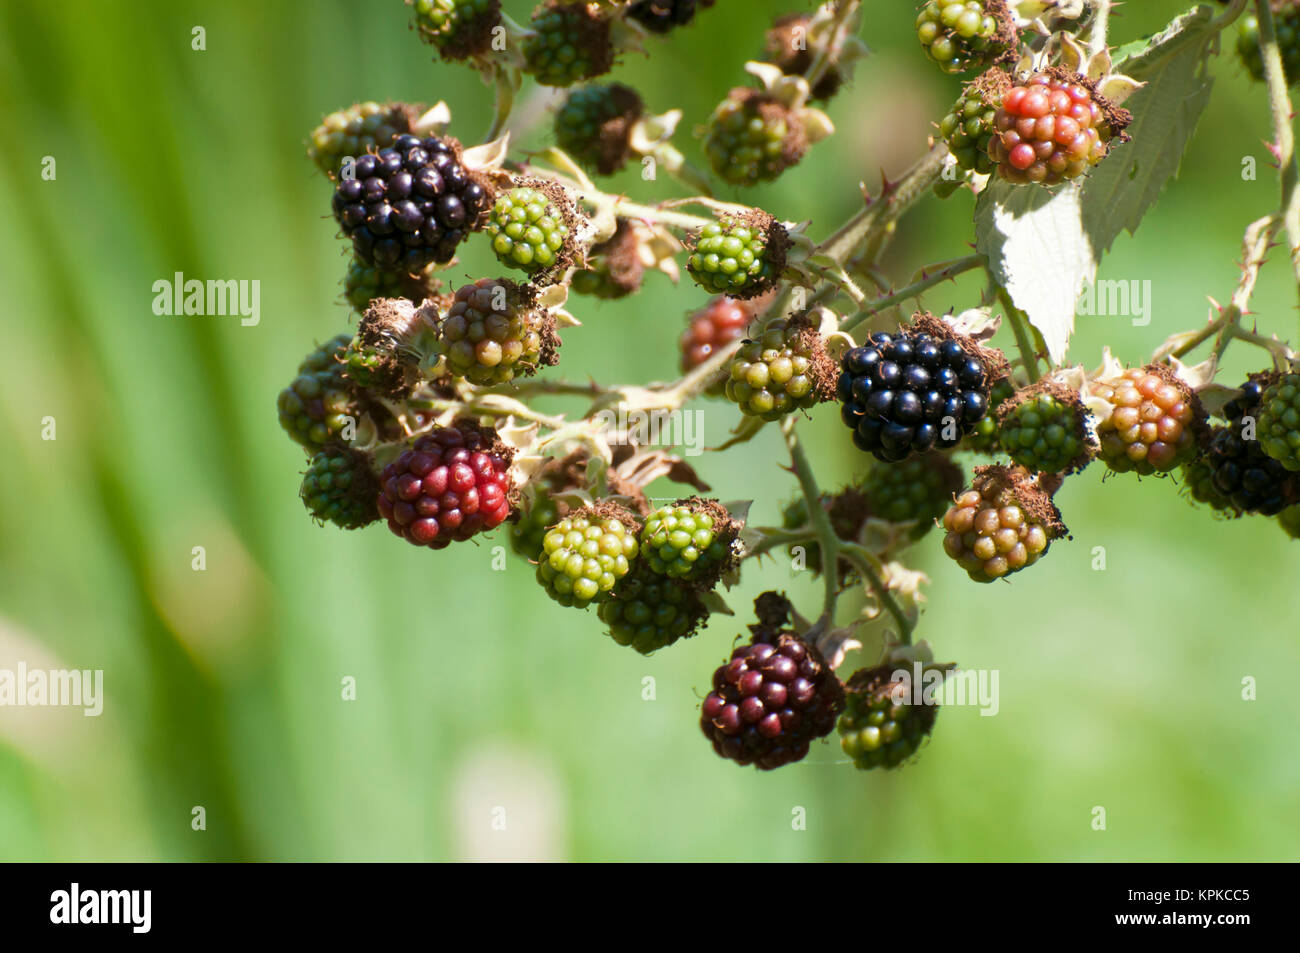 USA, WA, Nisqually National Wildlife Reserve. Himalayan Blackberries (Rubus armeniacus) are an invasive non-native species throughout the northwest. Native to Armenia, they are now widespread throughout the temperate world. Stock Photo